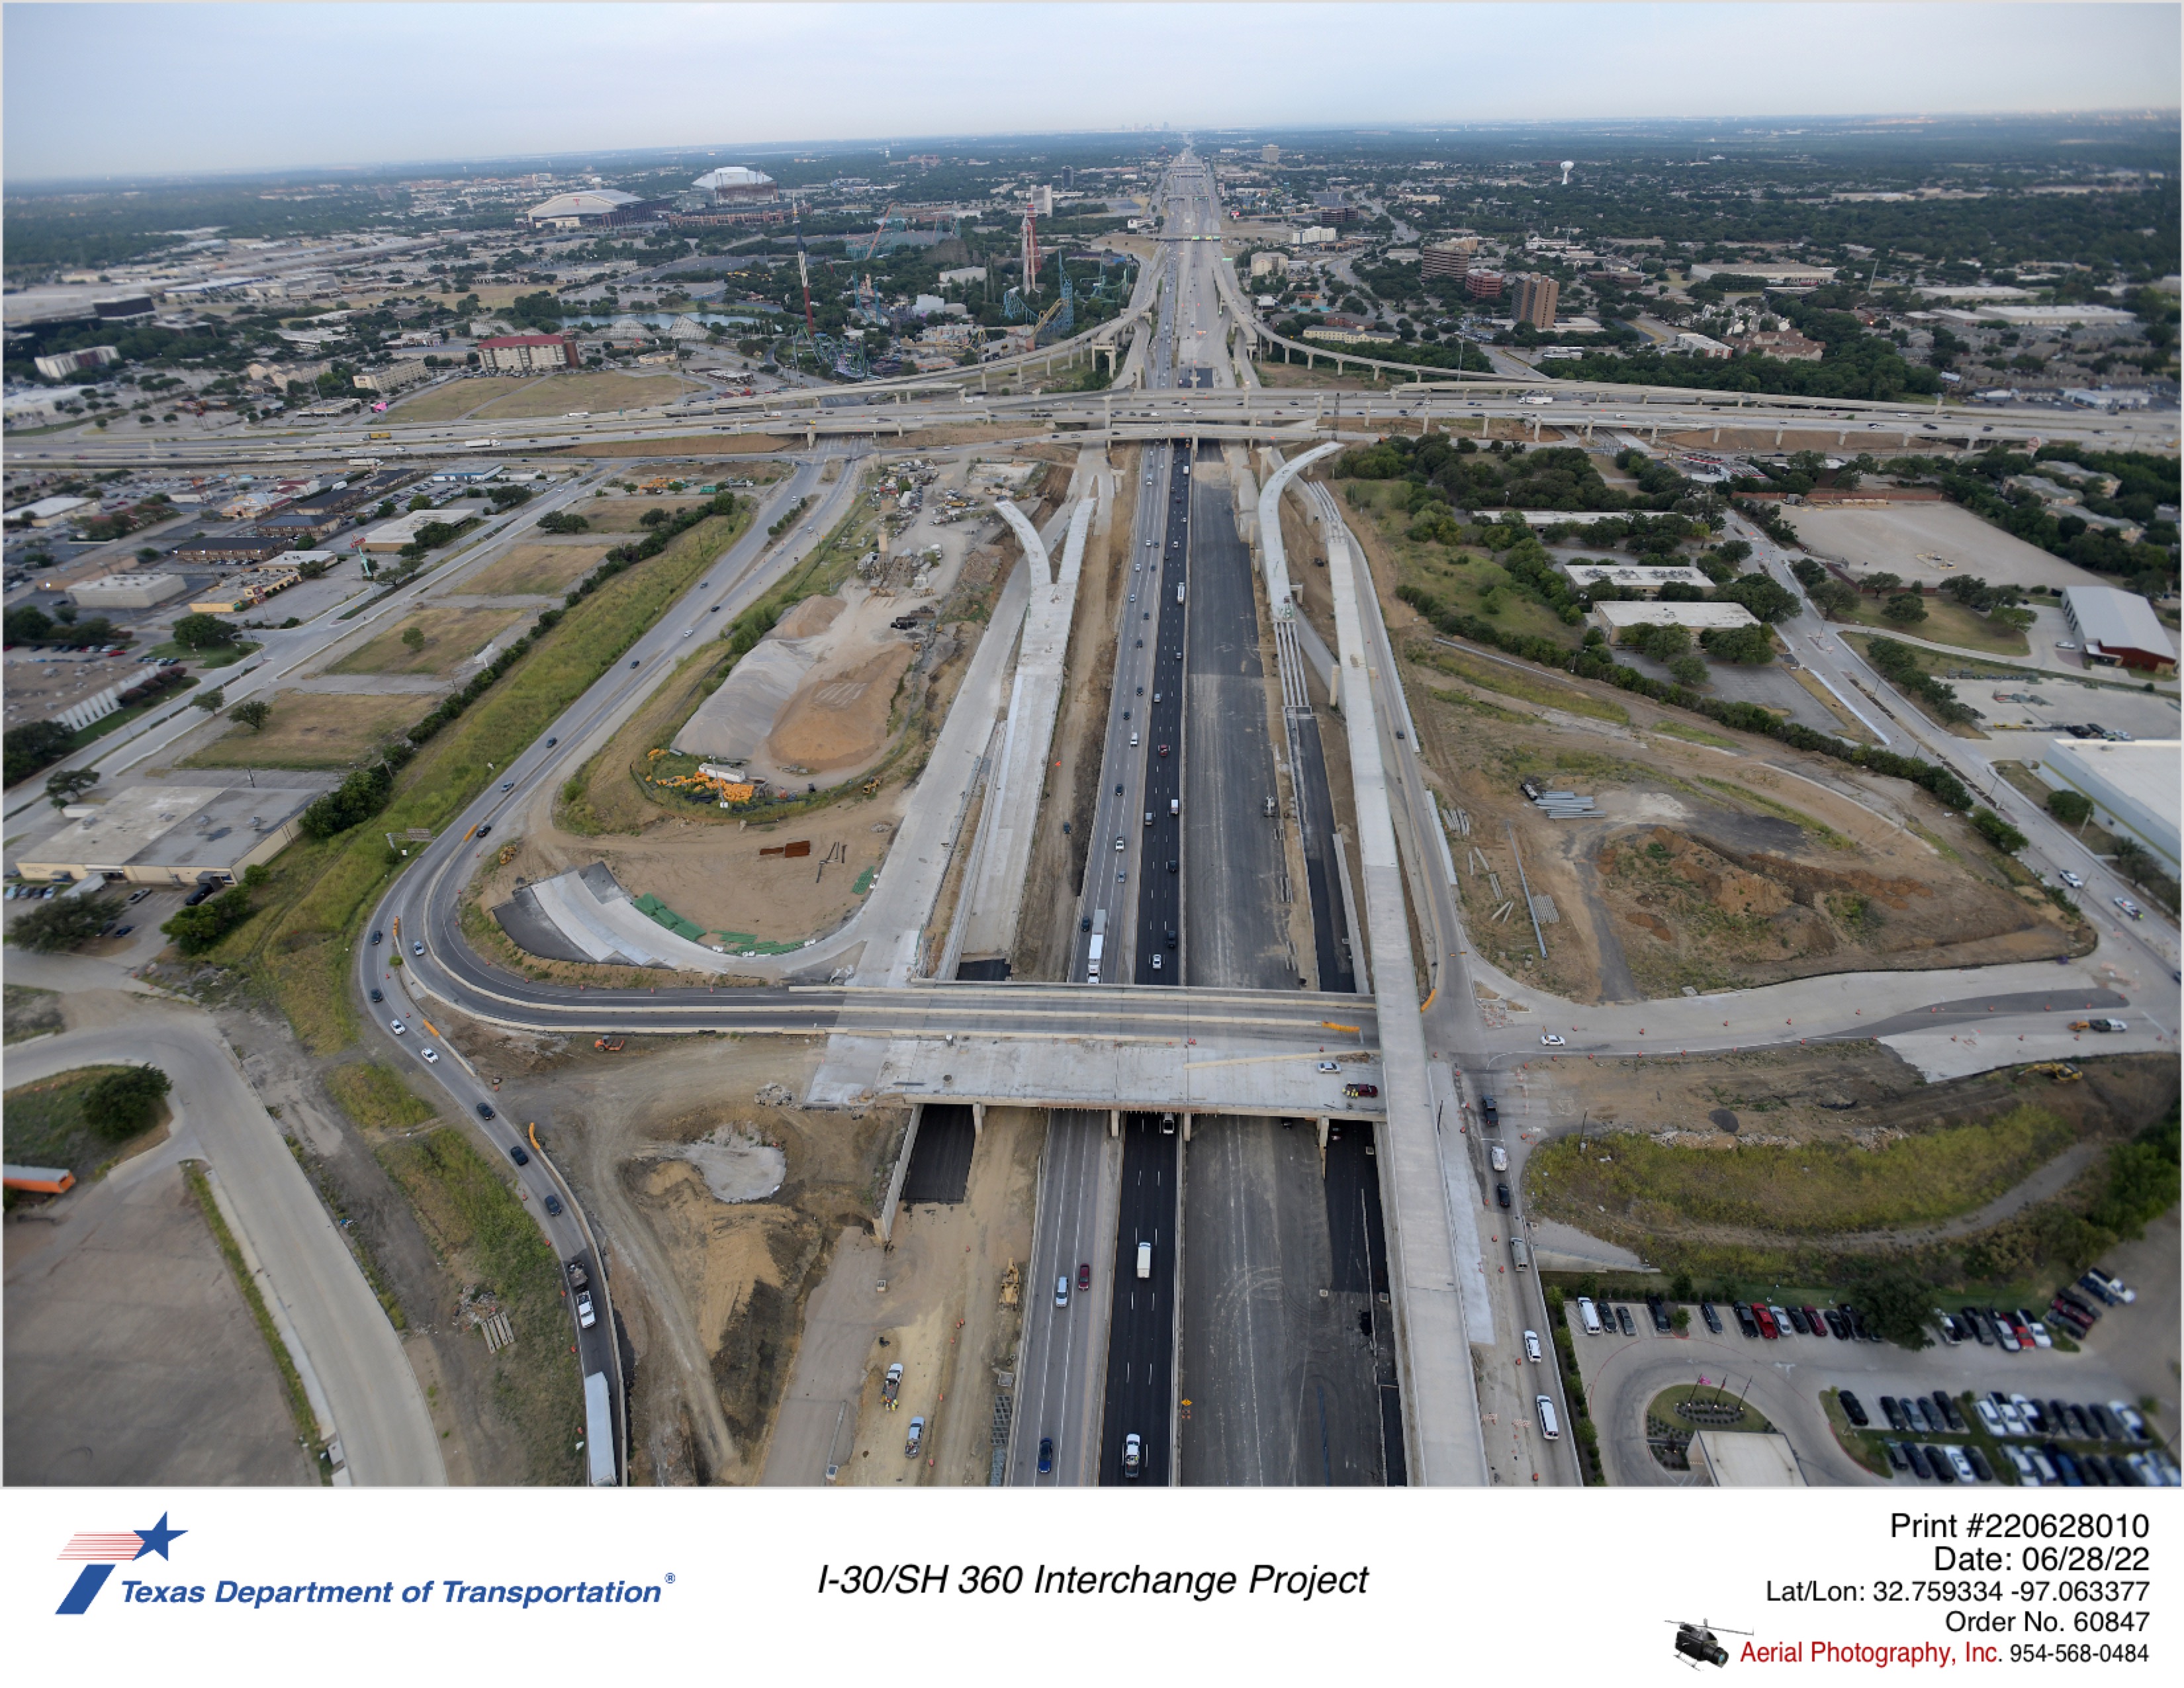 I-30/Six Flags Dr interchange in foreground and I-30/SH 360 interchange in background.